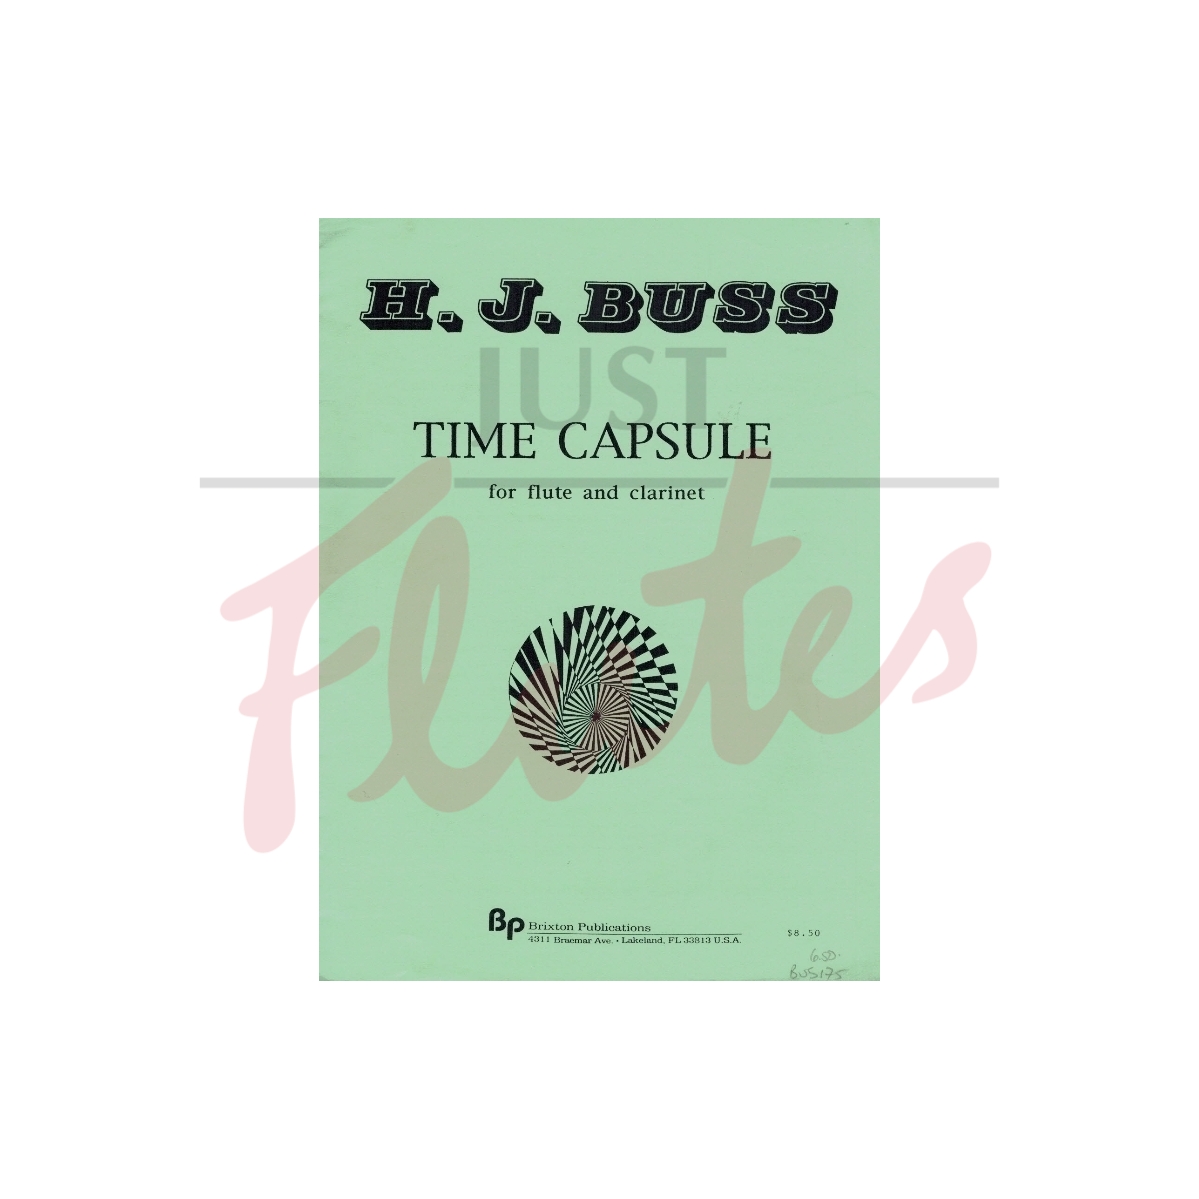 Time Capsule [Flute and Clarinet]